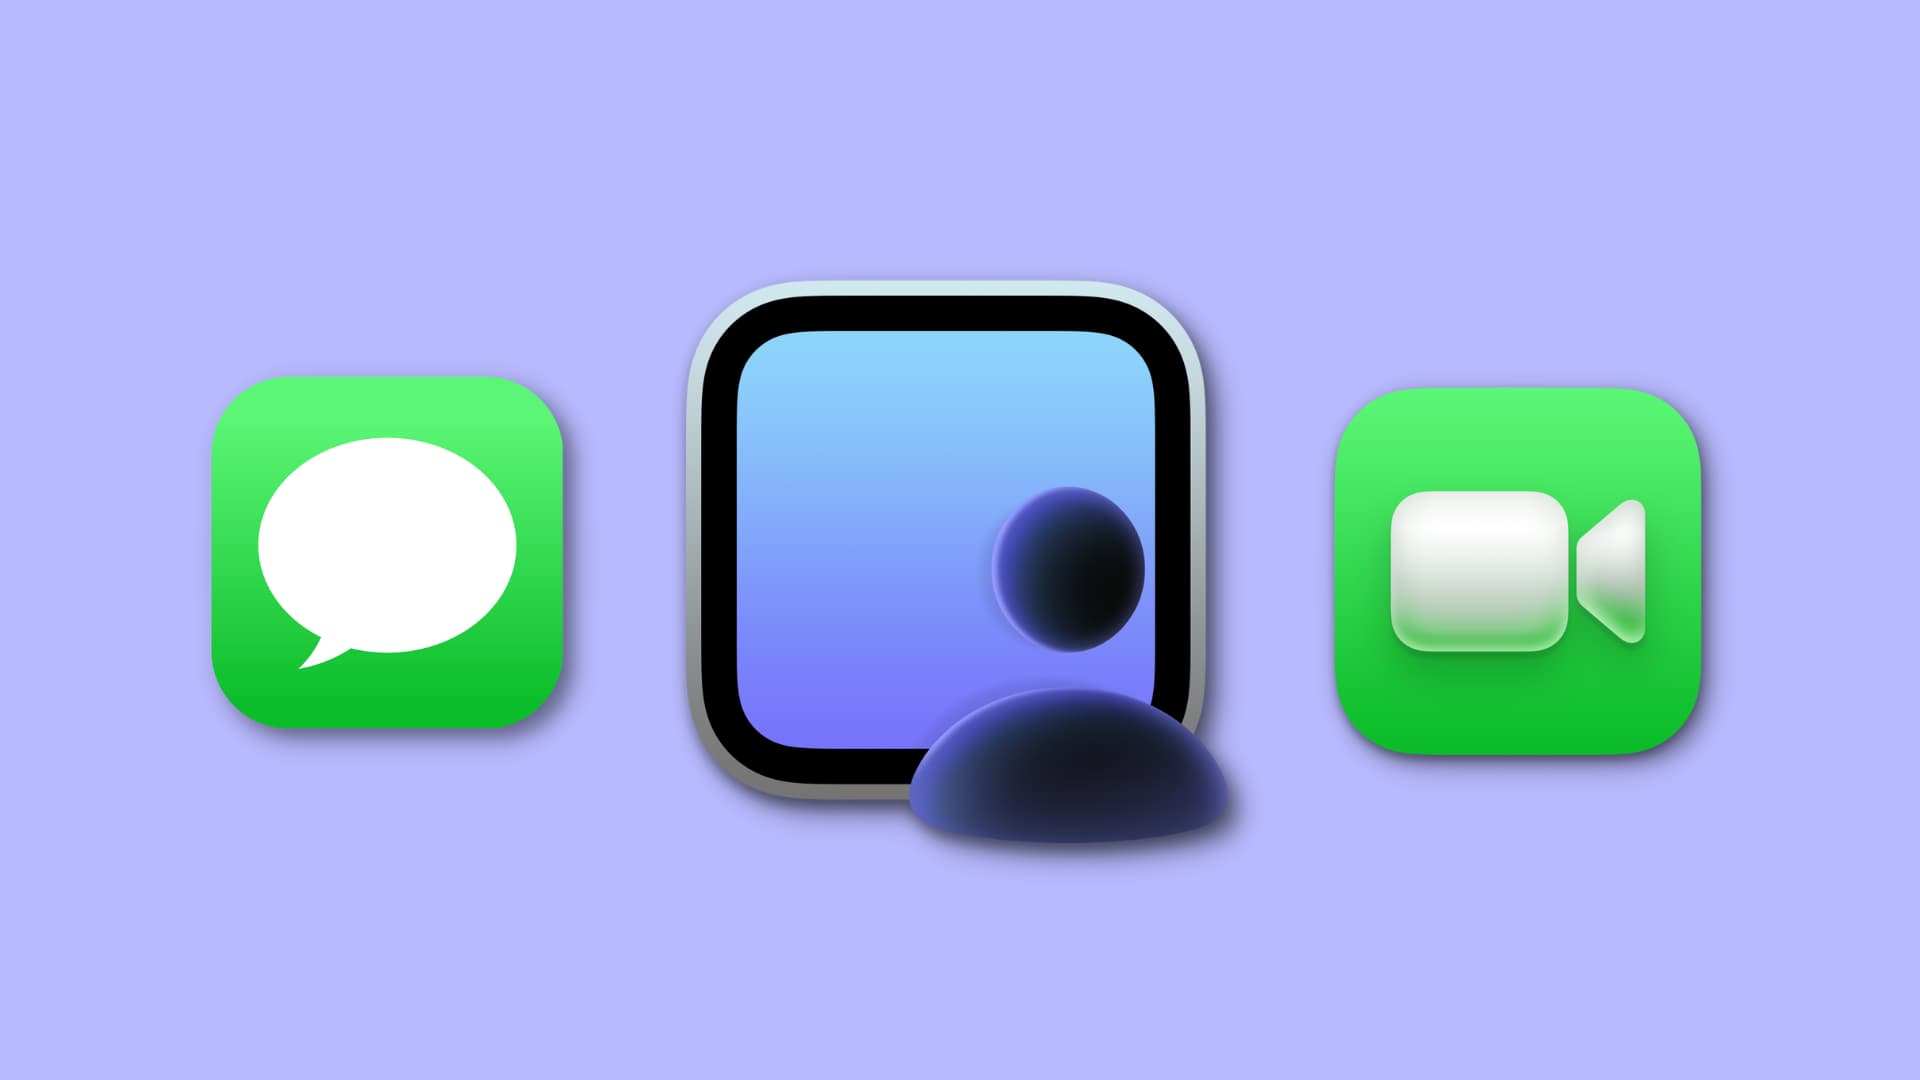 Messages, Screen Sharing, and FaceTime app icons for Mac